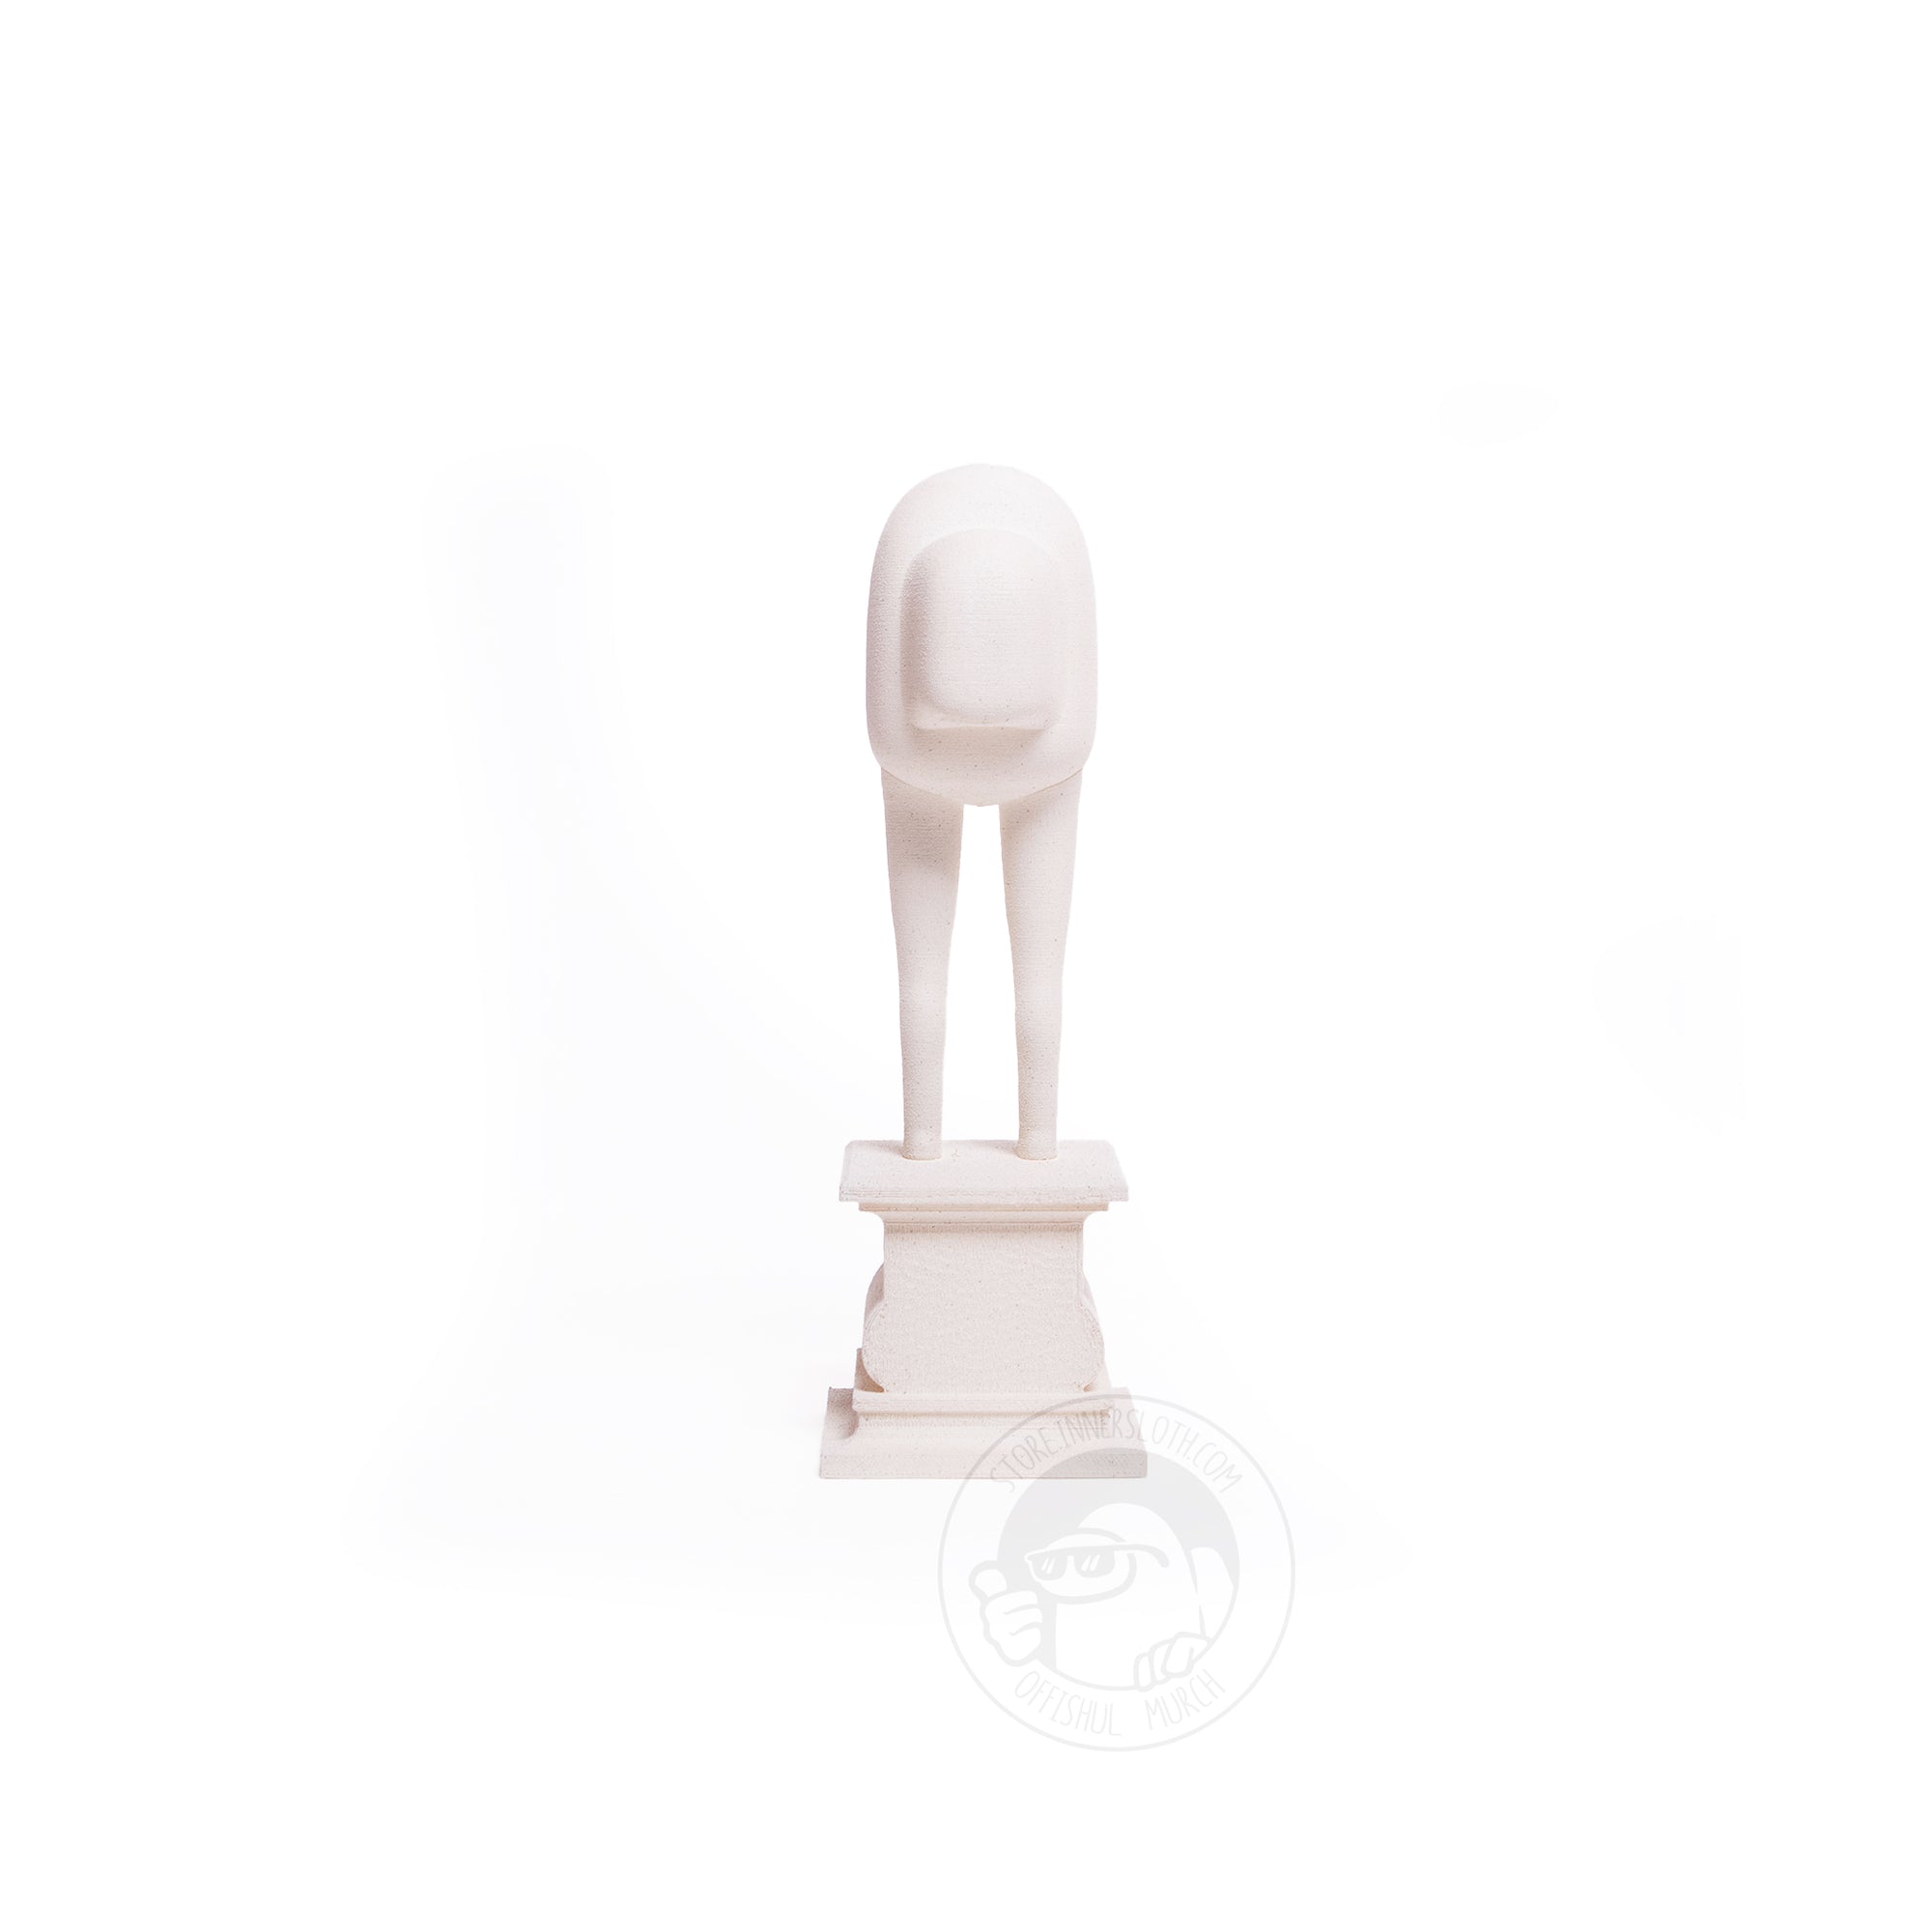 A front-facing product photo of an all white 3D printed Crewmate figurine standing on a pedestal by Garbage Inc. The Crewmate body is a rounded egg shape with extremely long legs and teeny tiny feet. The Crewmate is standing on a fancy pedestal with a banner that reads “Among Us” across the front. 